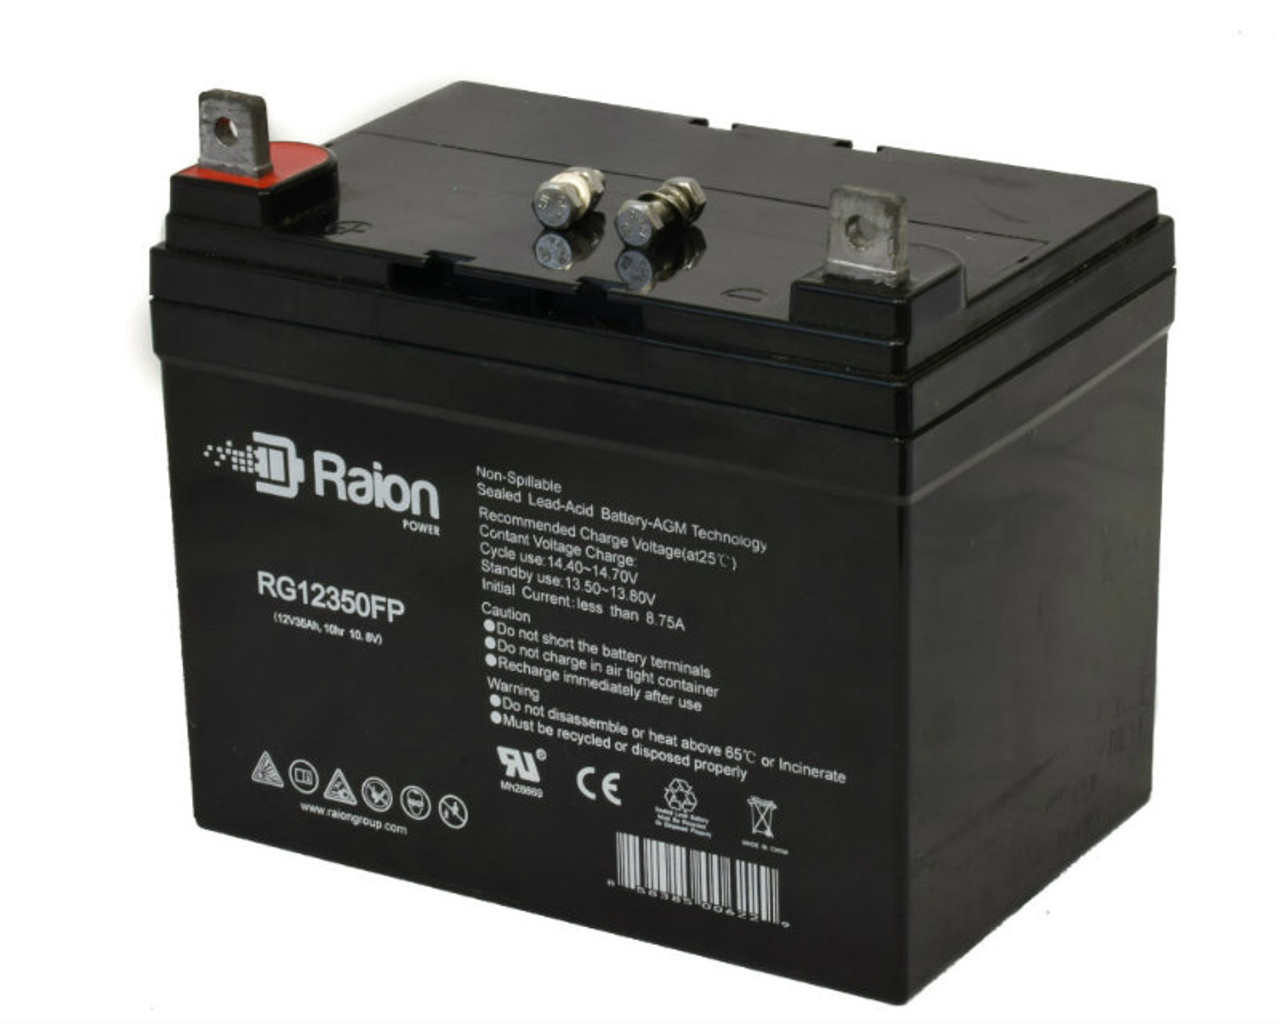 Raion Power Replacement 12V 35Ah RG12350FP Mobility Scooter Battery for Pillar Technology Express